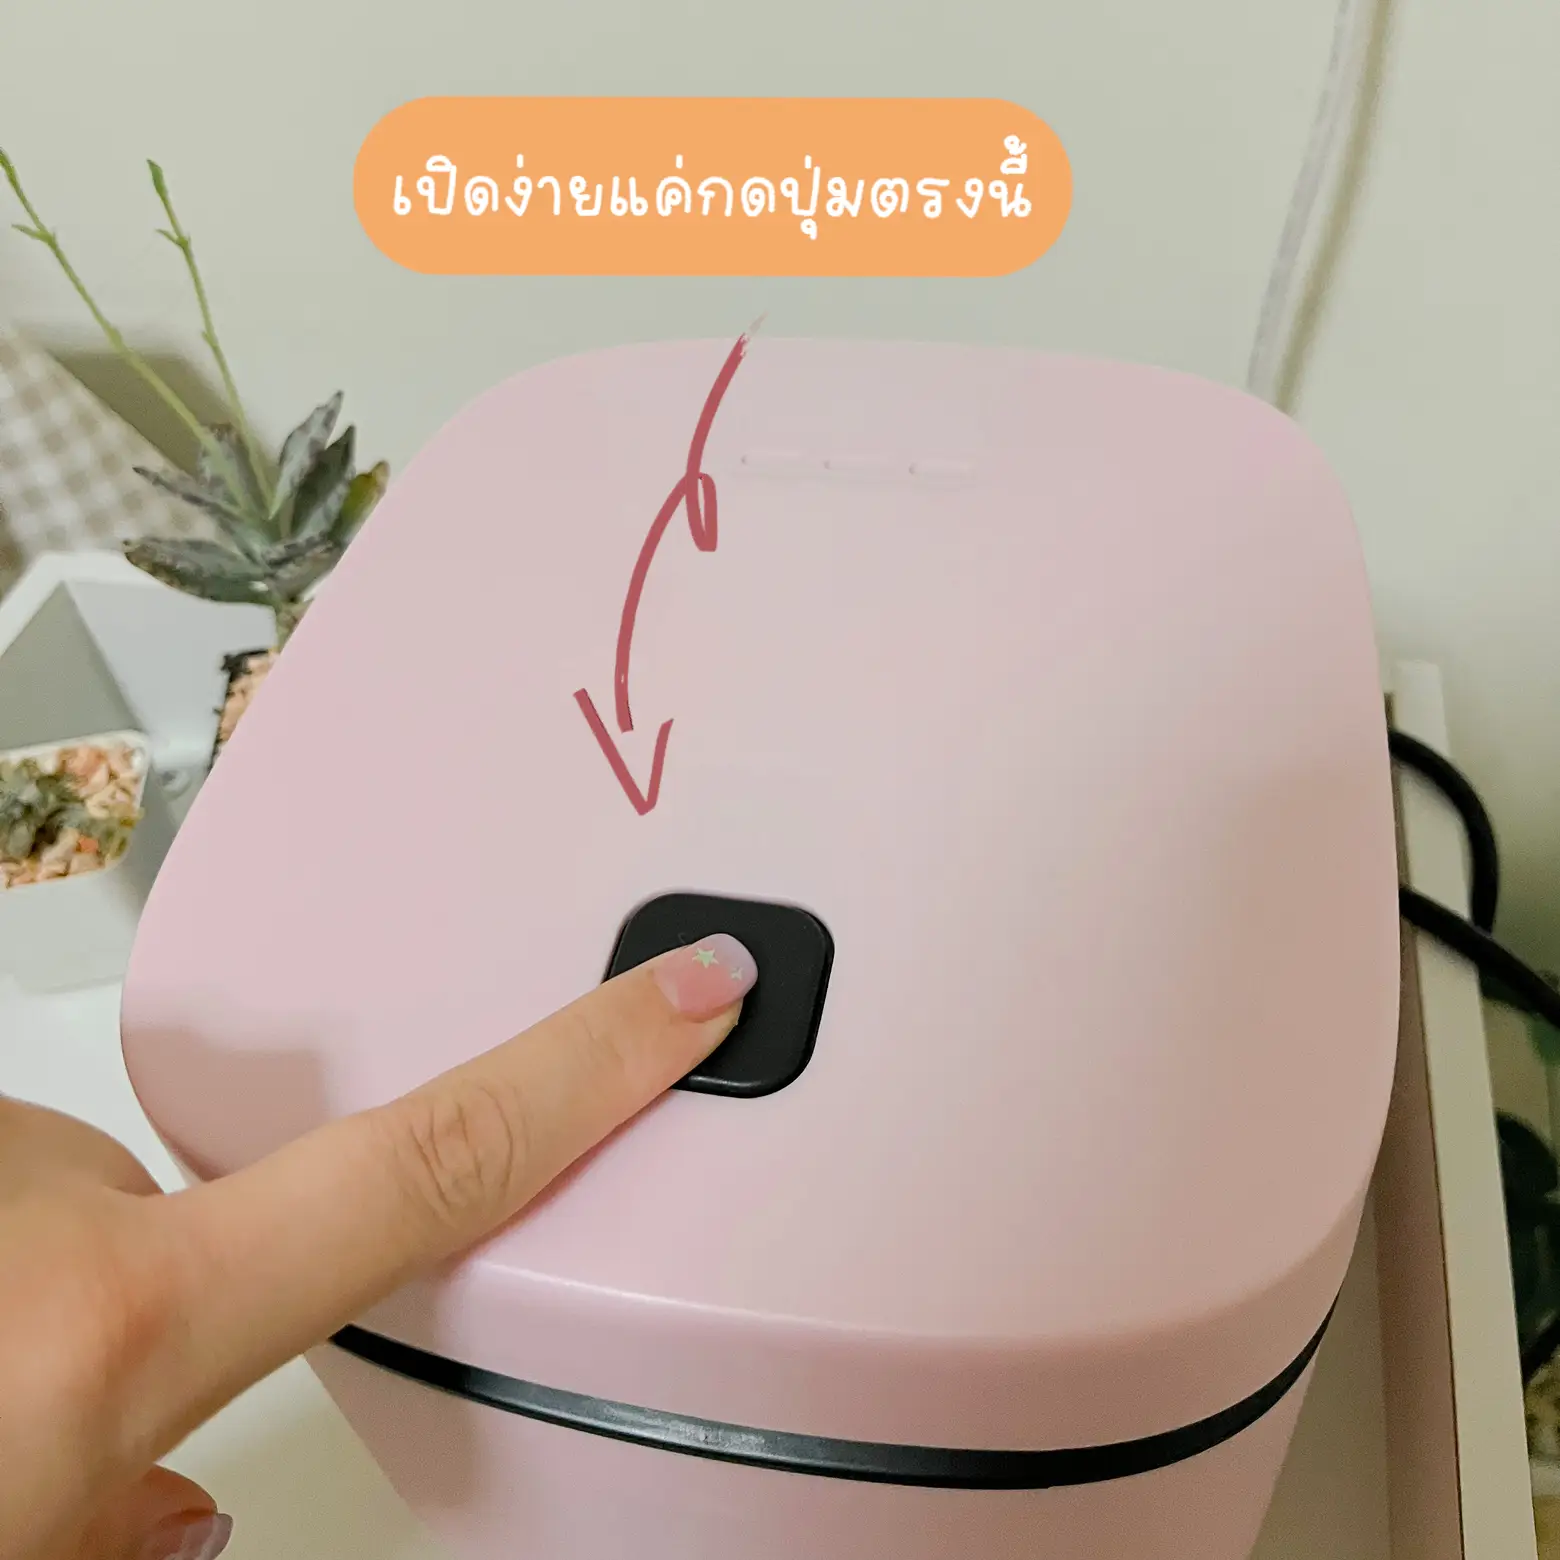 Mini Rice Cooker  Urban Outfitters Singapore